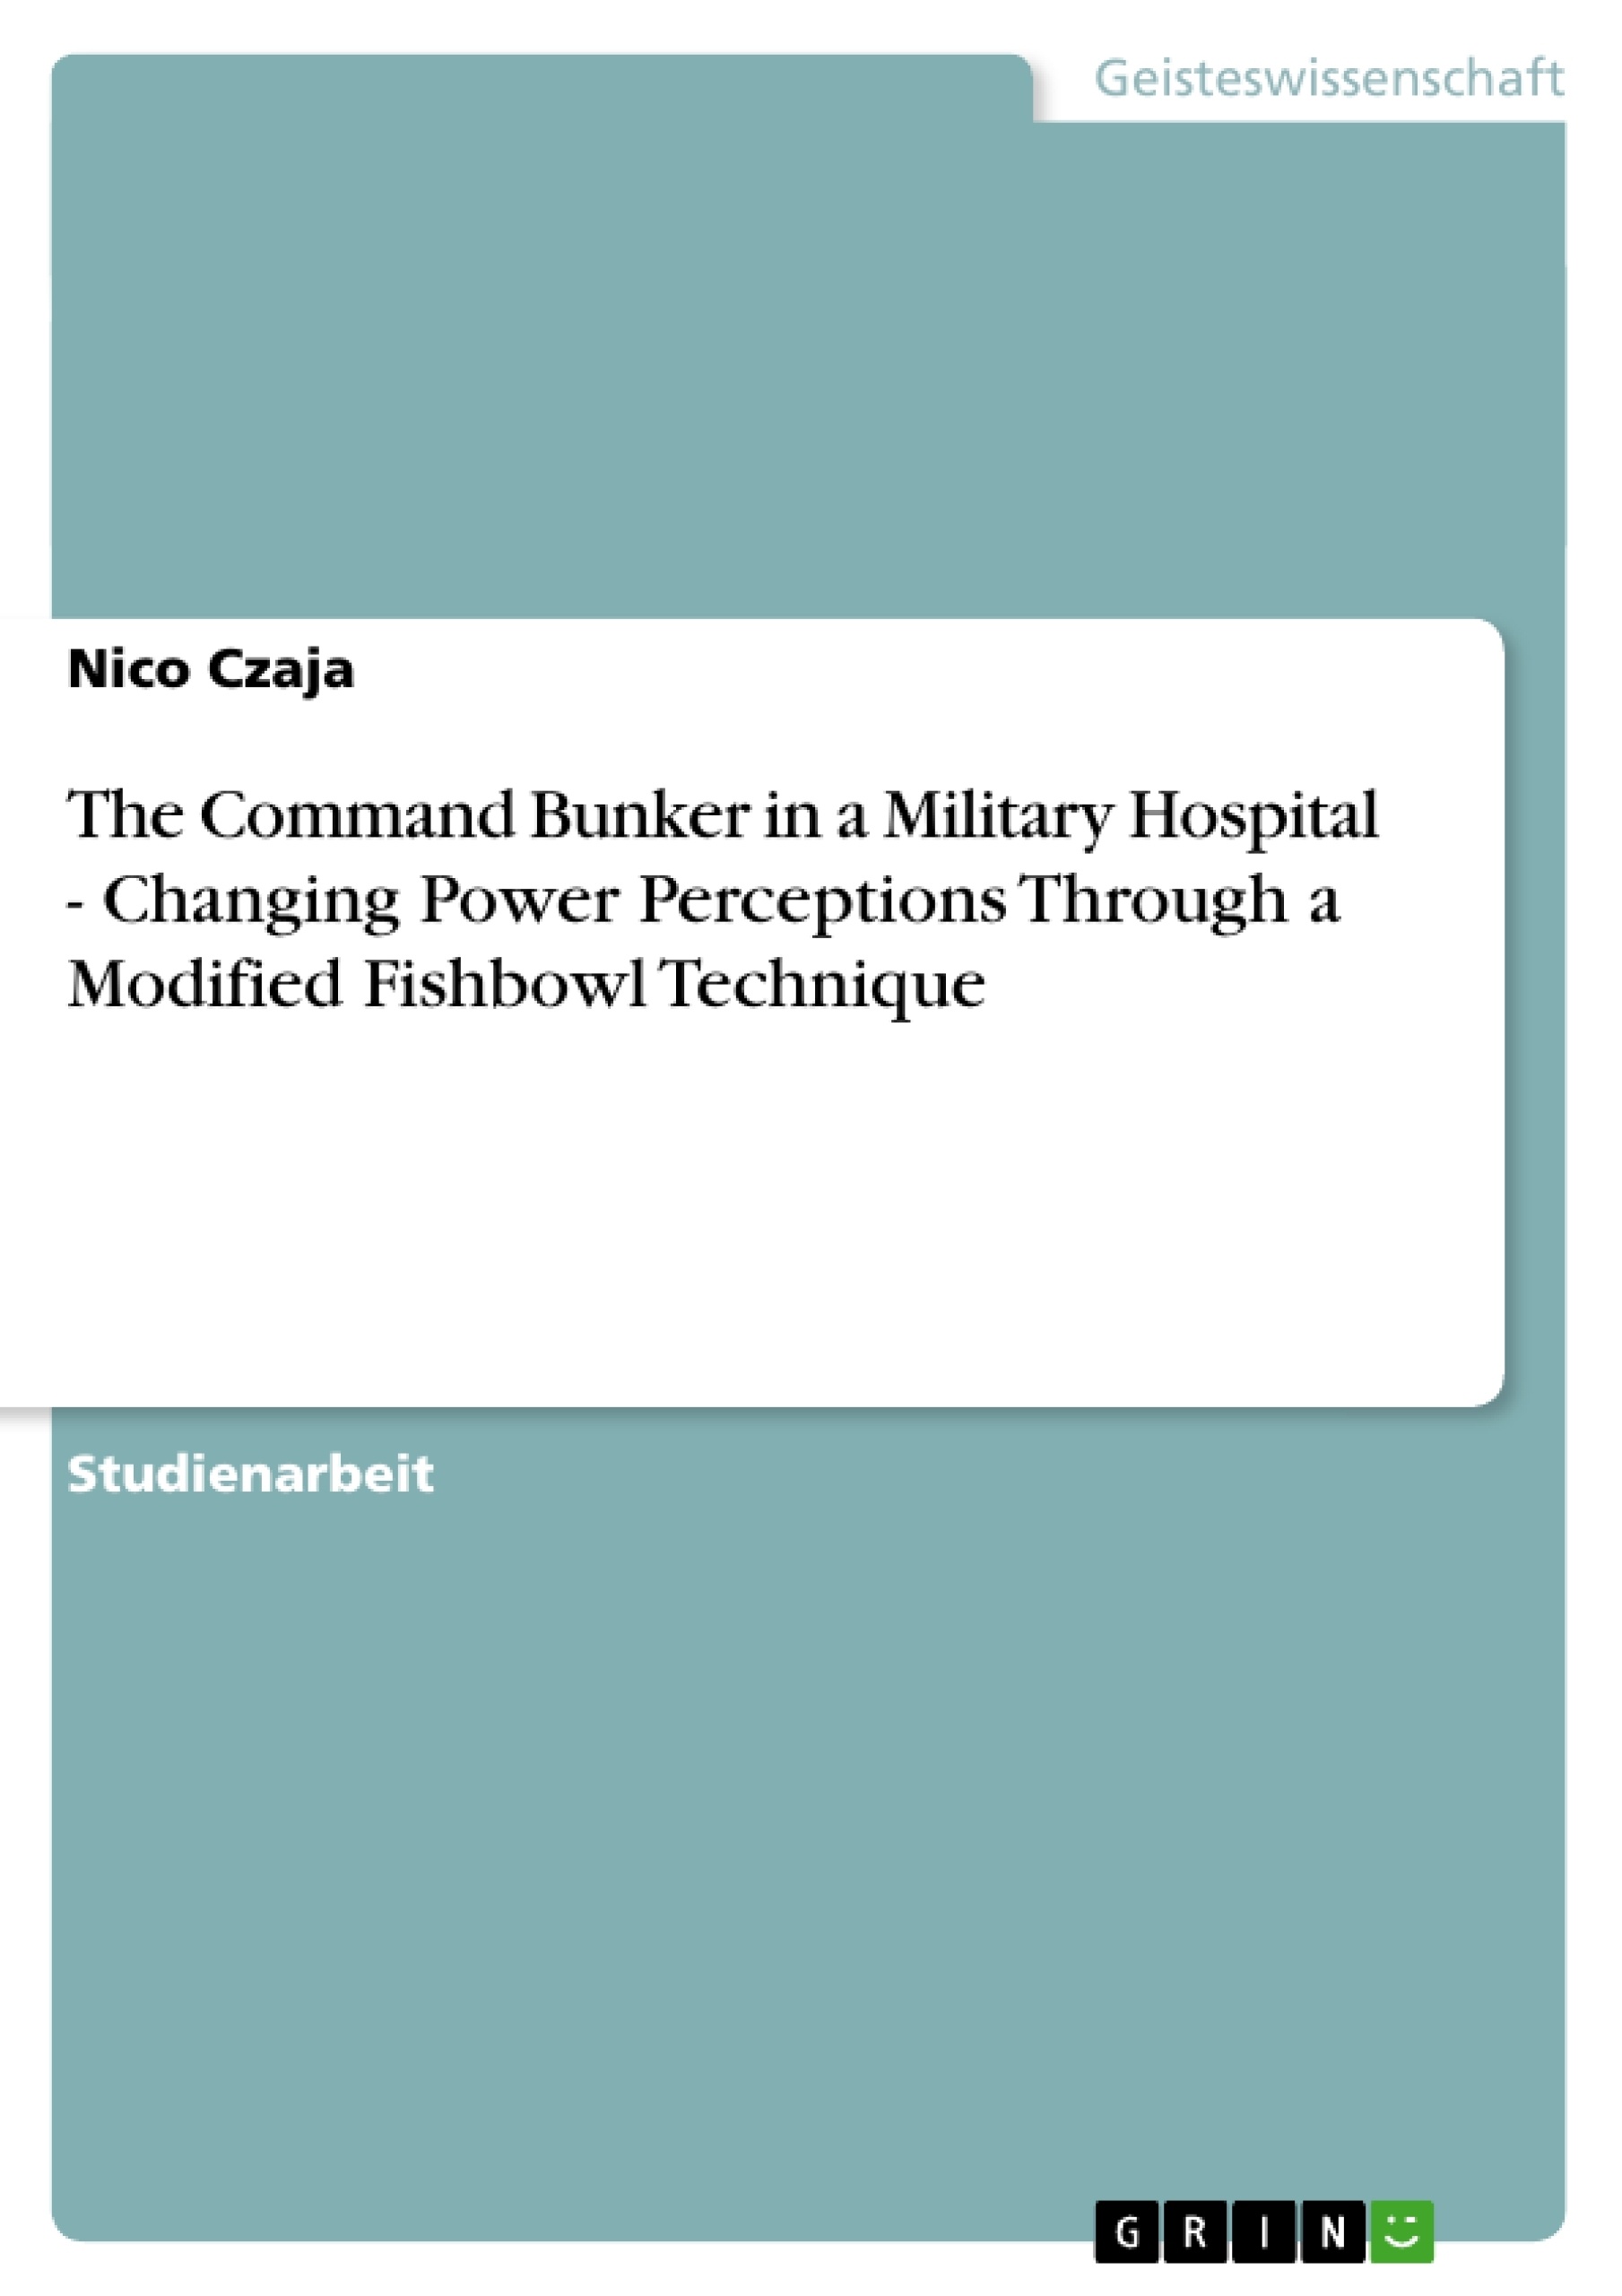 Titel: The Command Bunker in a Military Hospital - Changing Power Perceptions Through a Modified Fishbowl Technique